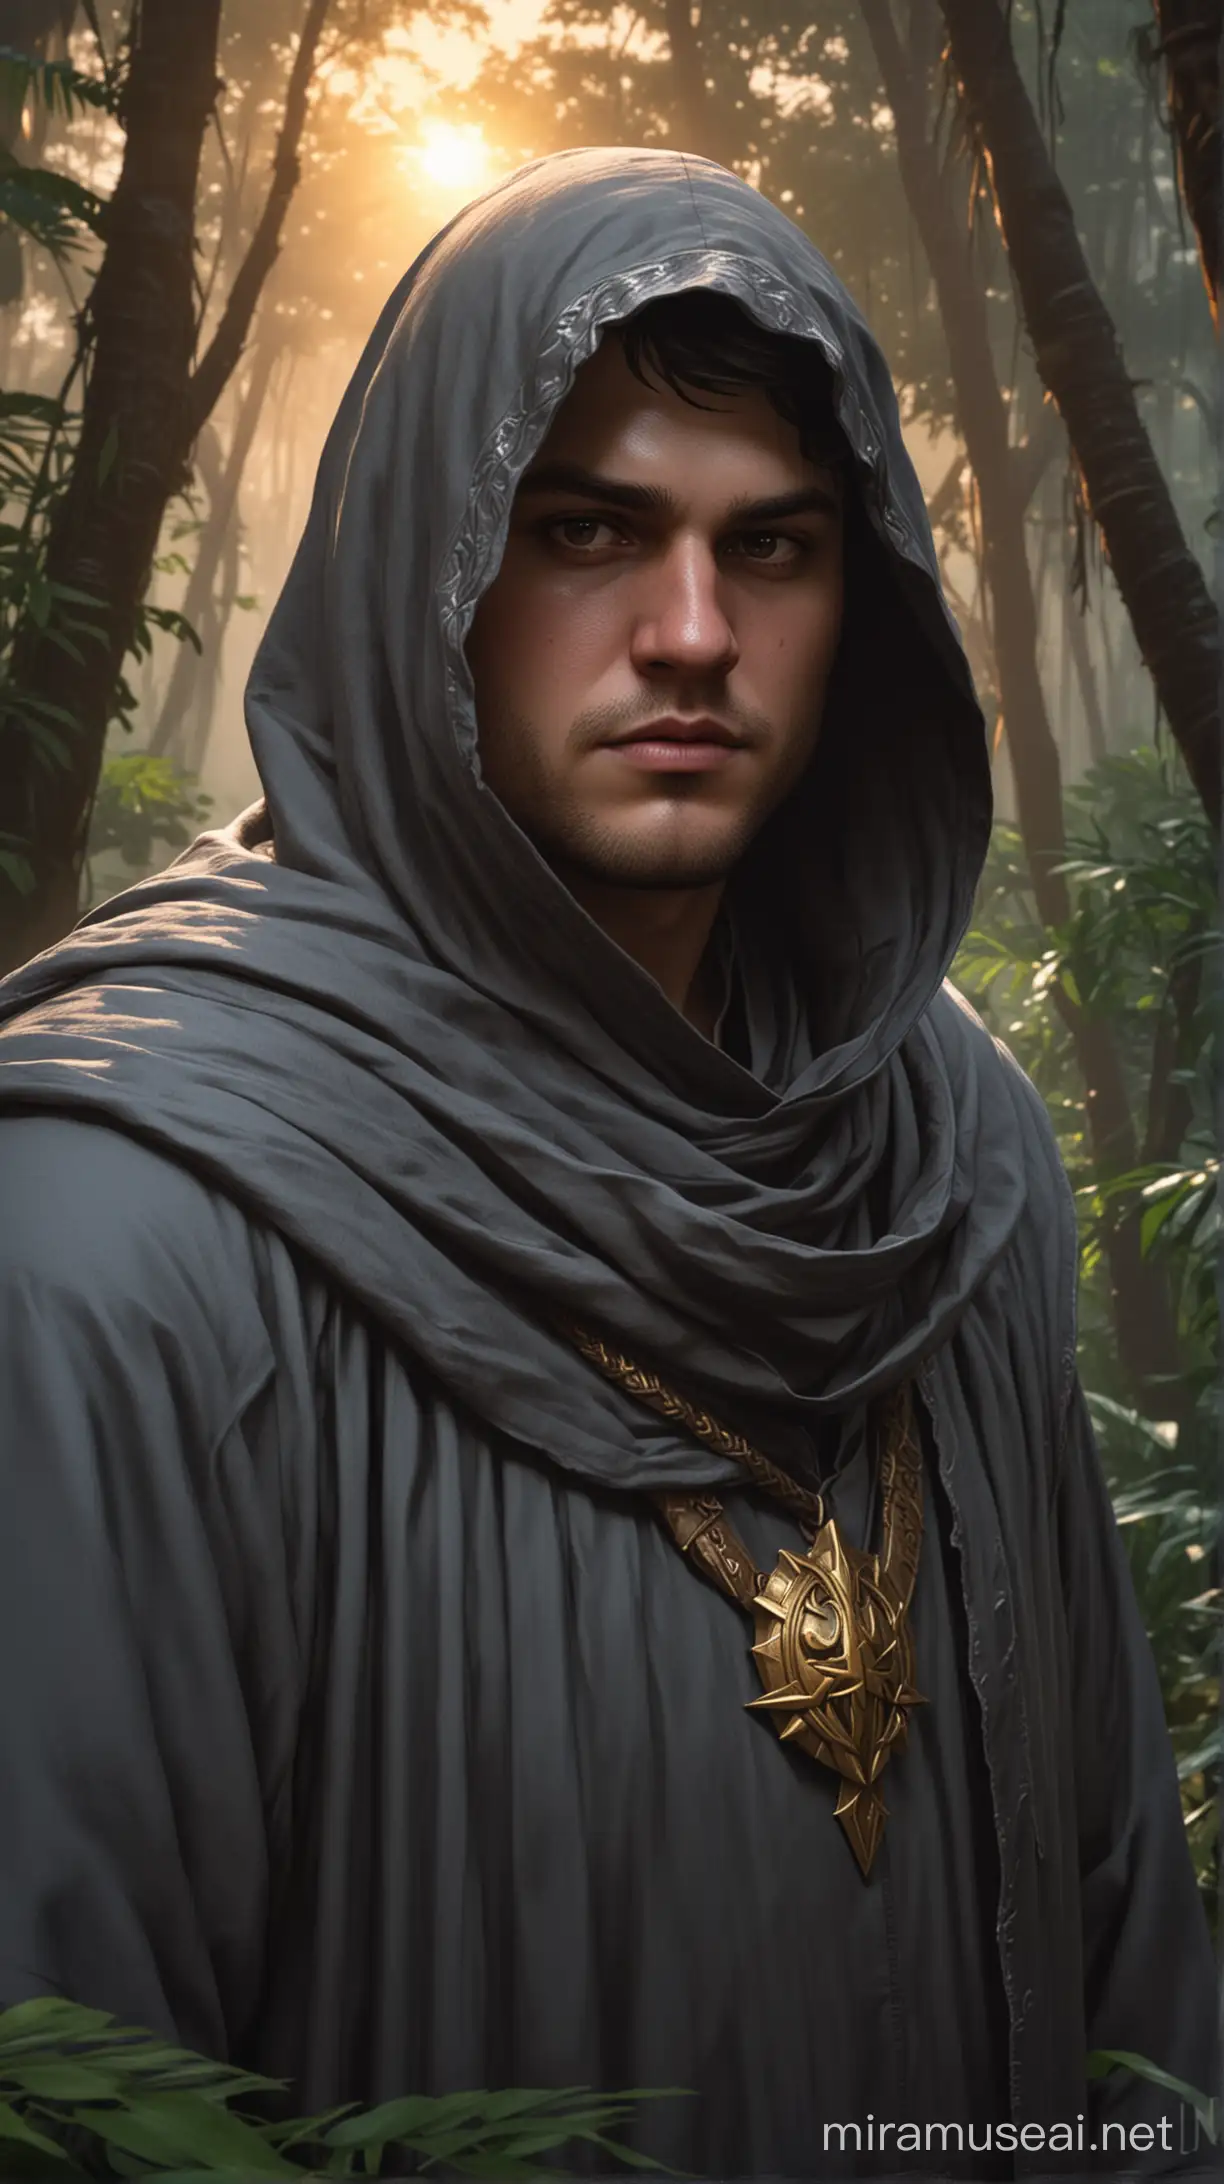 male chubby face,short body,twilight cleric simple long flowing dark gray robes face hidden under a hood sun setting in jungle in background